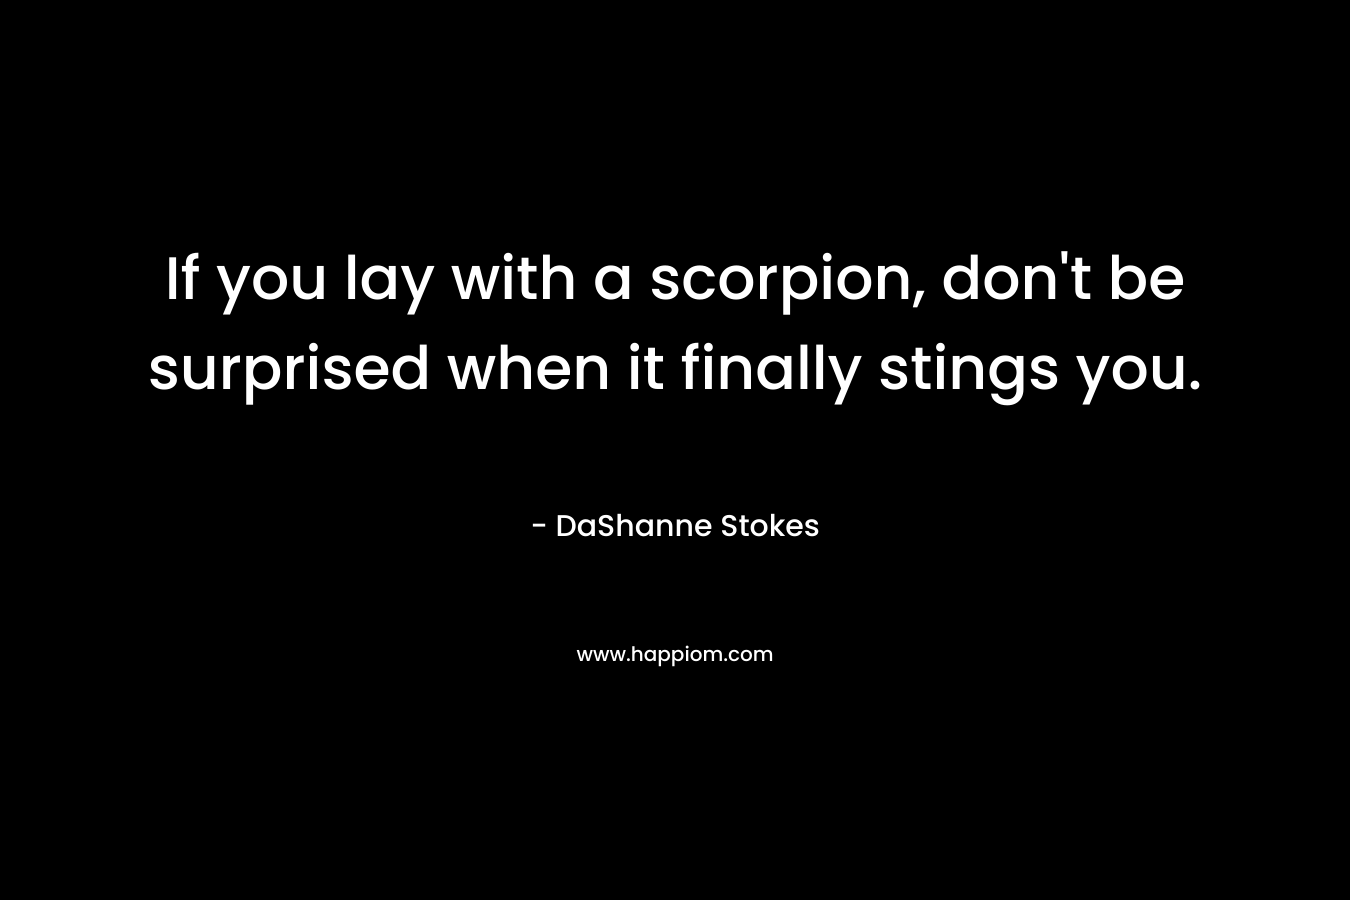 If you lay with a scorpion, don’t be surprised when it finally stings you. – DaShanne Stokes